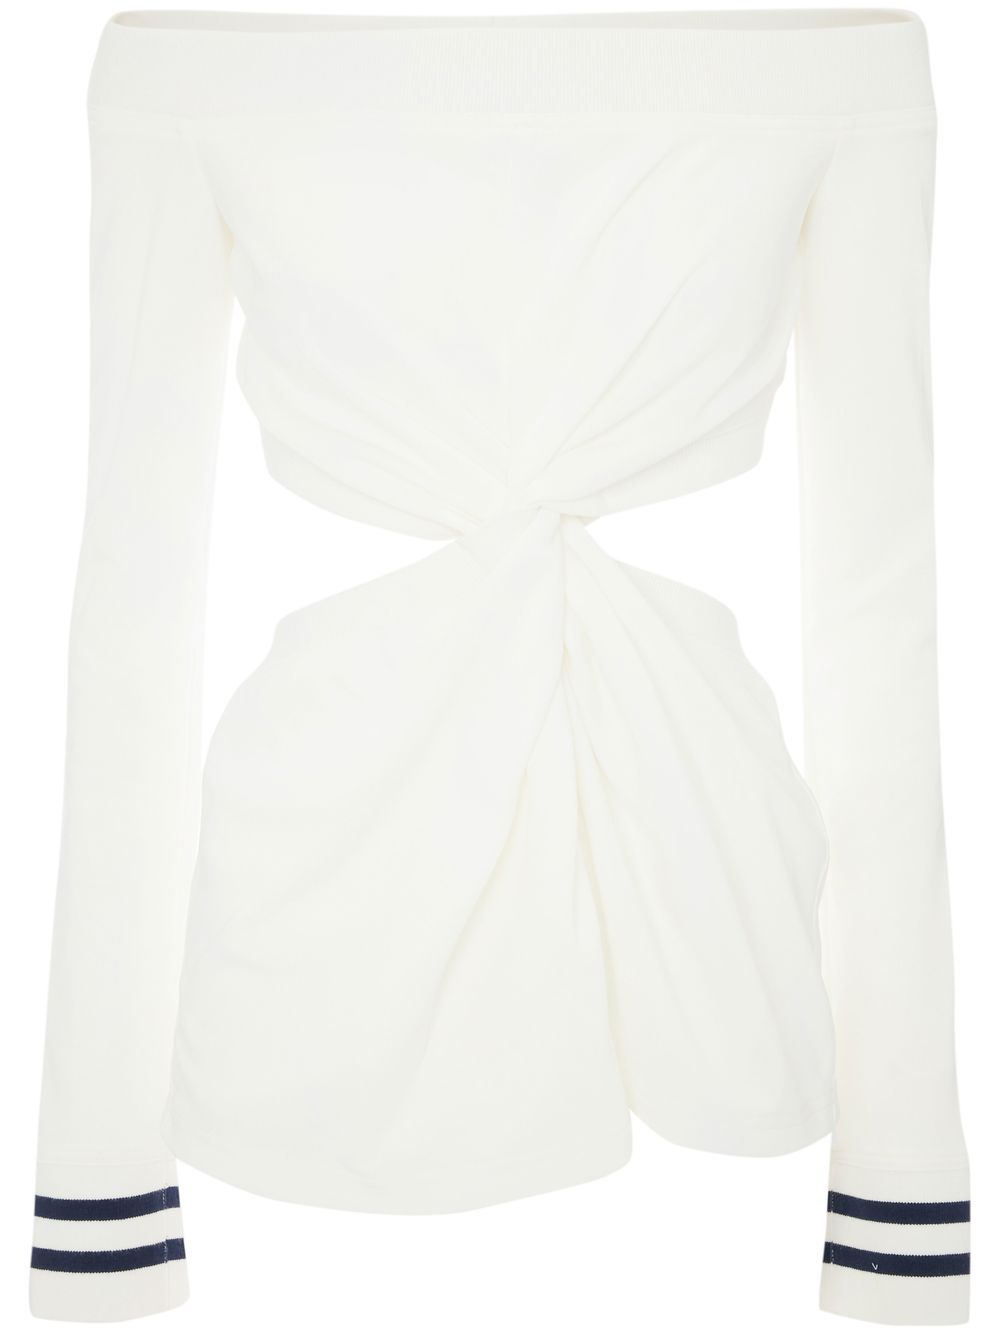 JW Anderson cut-out twisted top - White